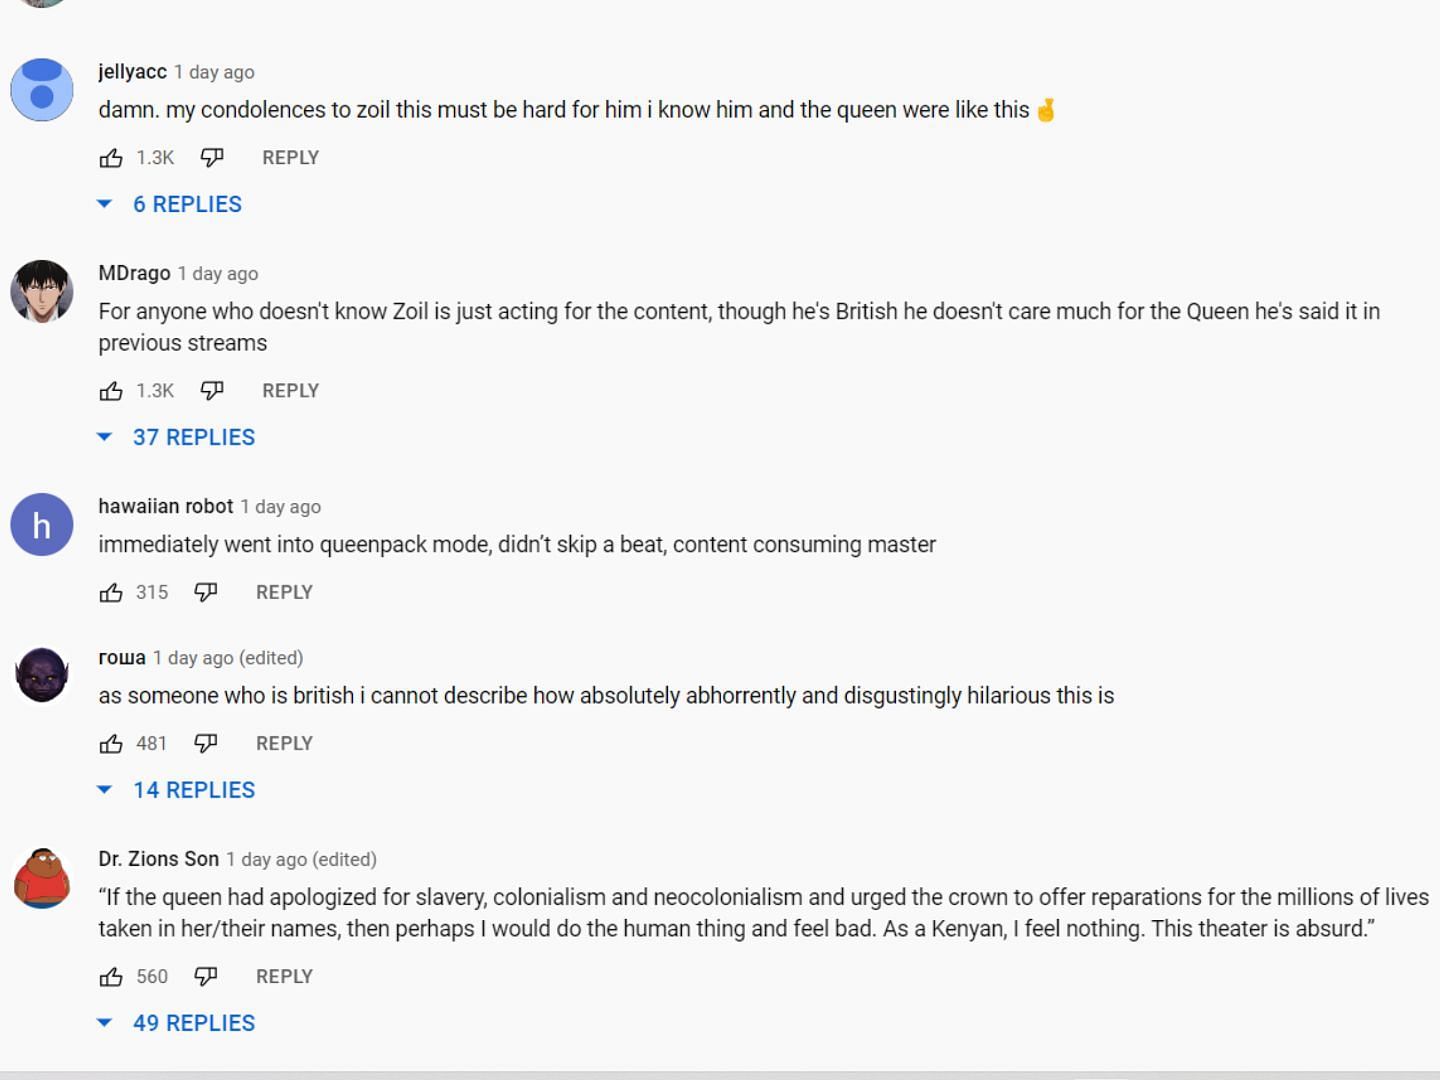 YouTube reacts to HasanAbi's recent viral video on Quenn Elizabeth's death (Image via Hasanabi Productions/YouTube)